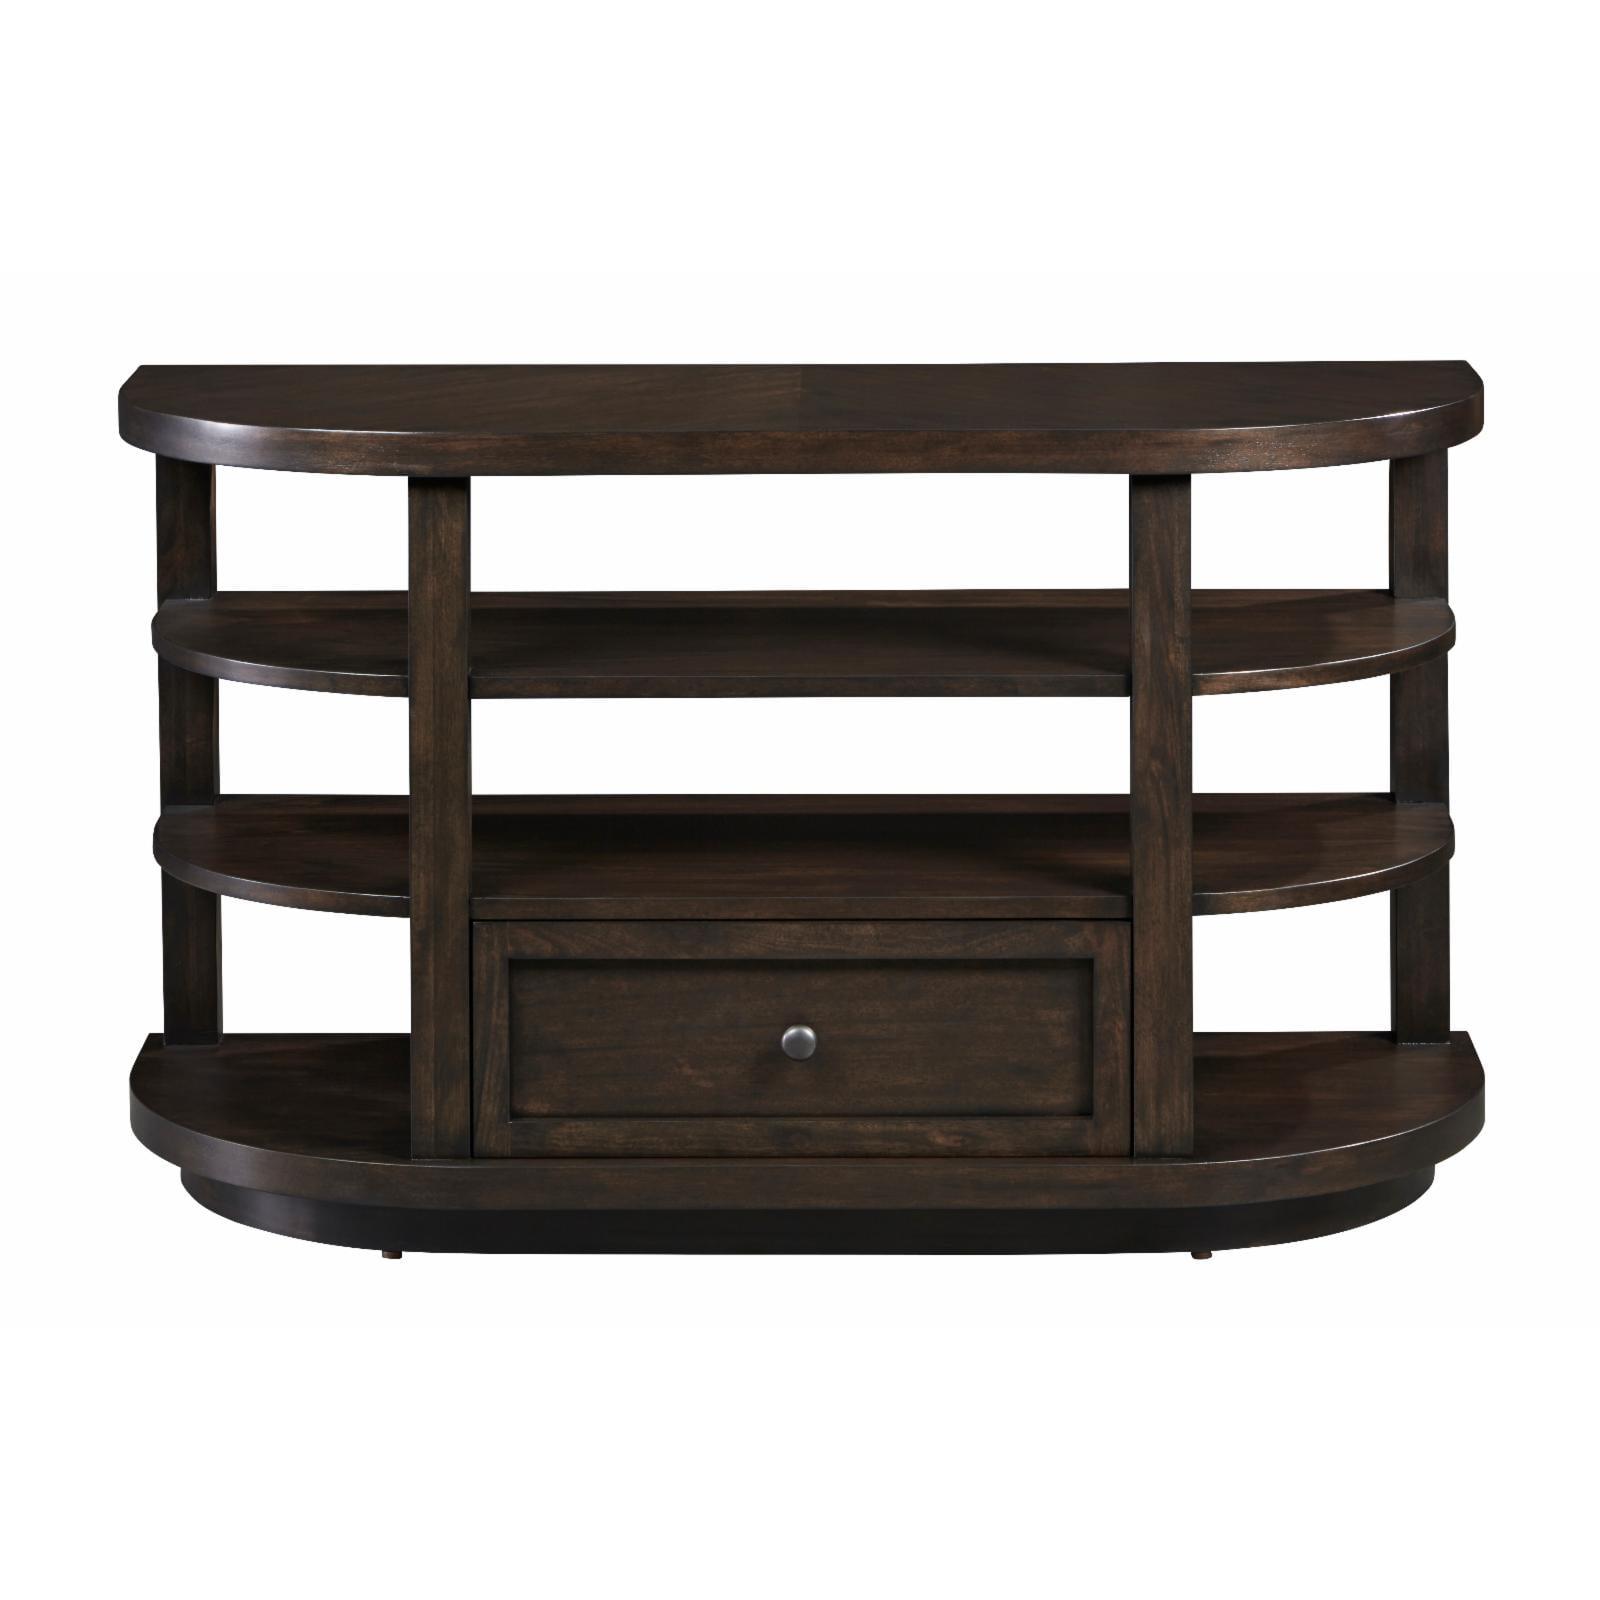 Grove Park Transitional Chocolate Mahogany Console Table with Storage